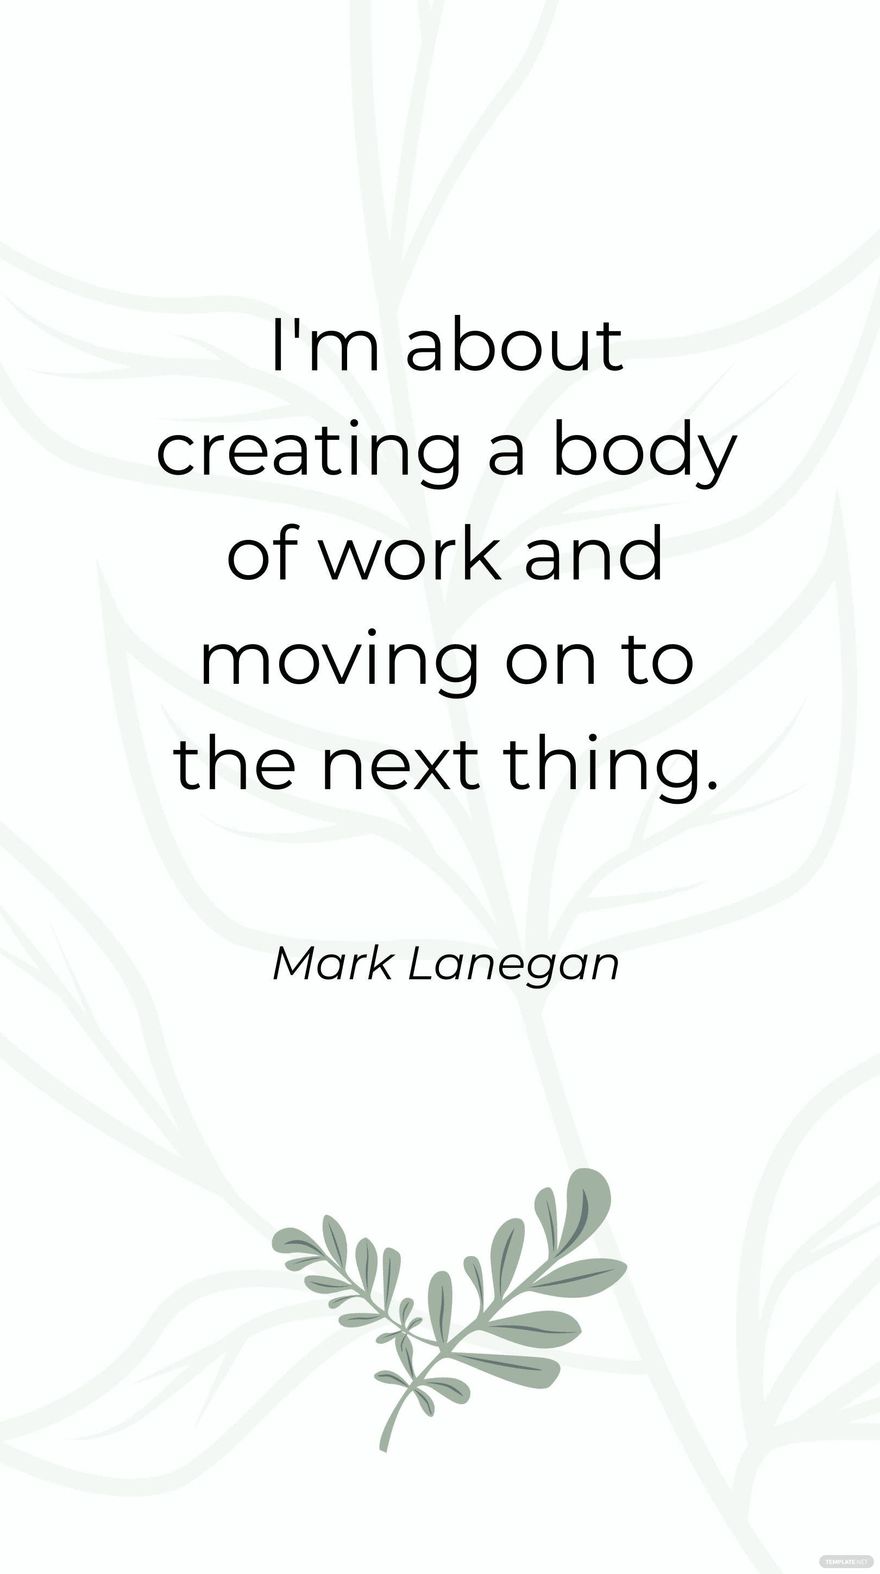 Free Mark Lanegan - I'm about creating a body of work and moving on to the next thing. in JPG